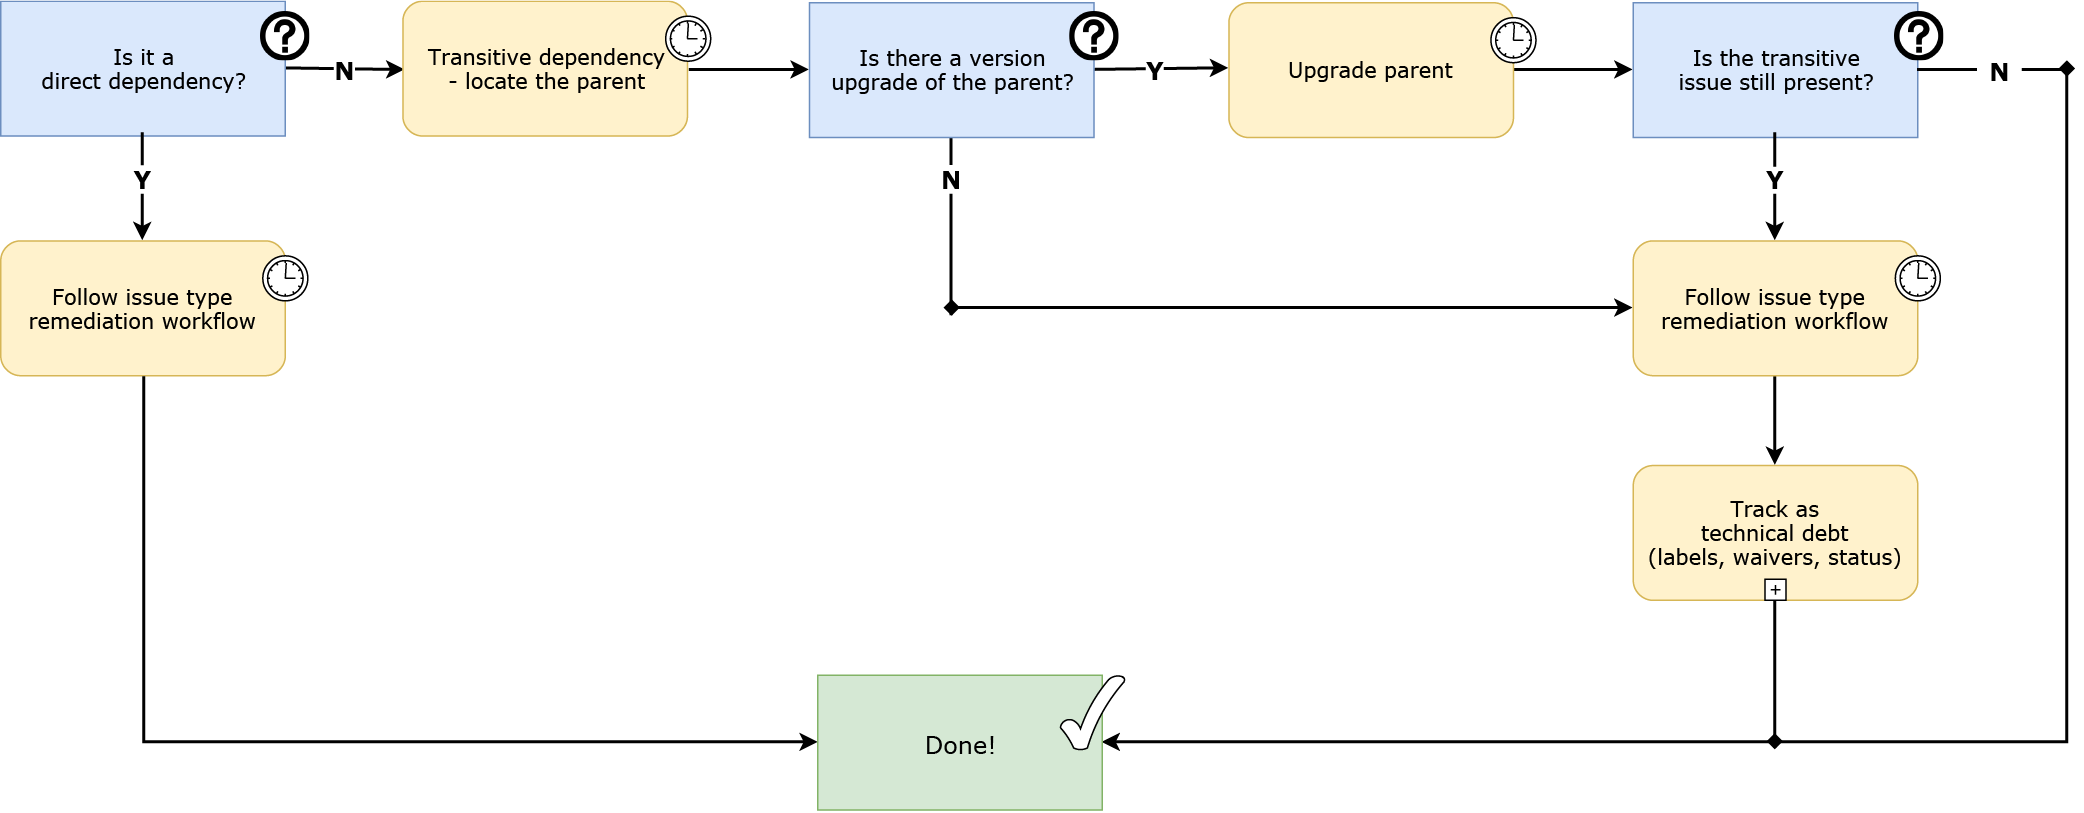 Example of a sample issue resolution workflow